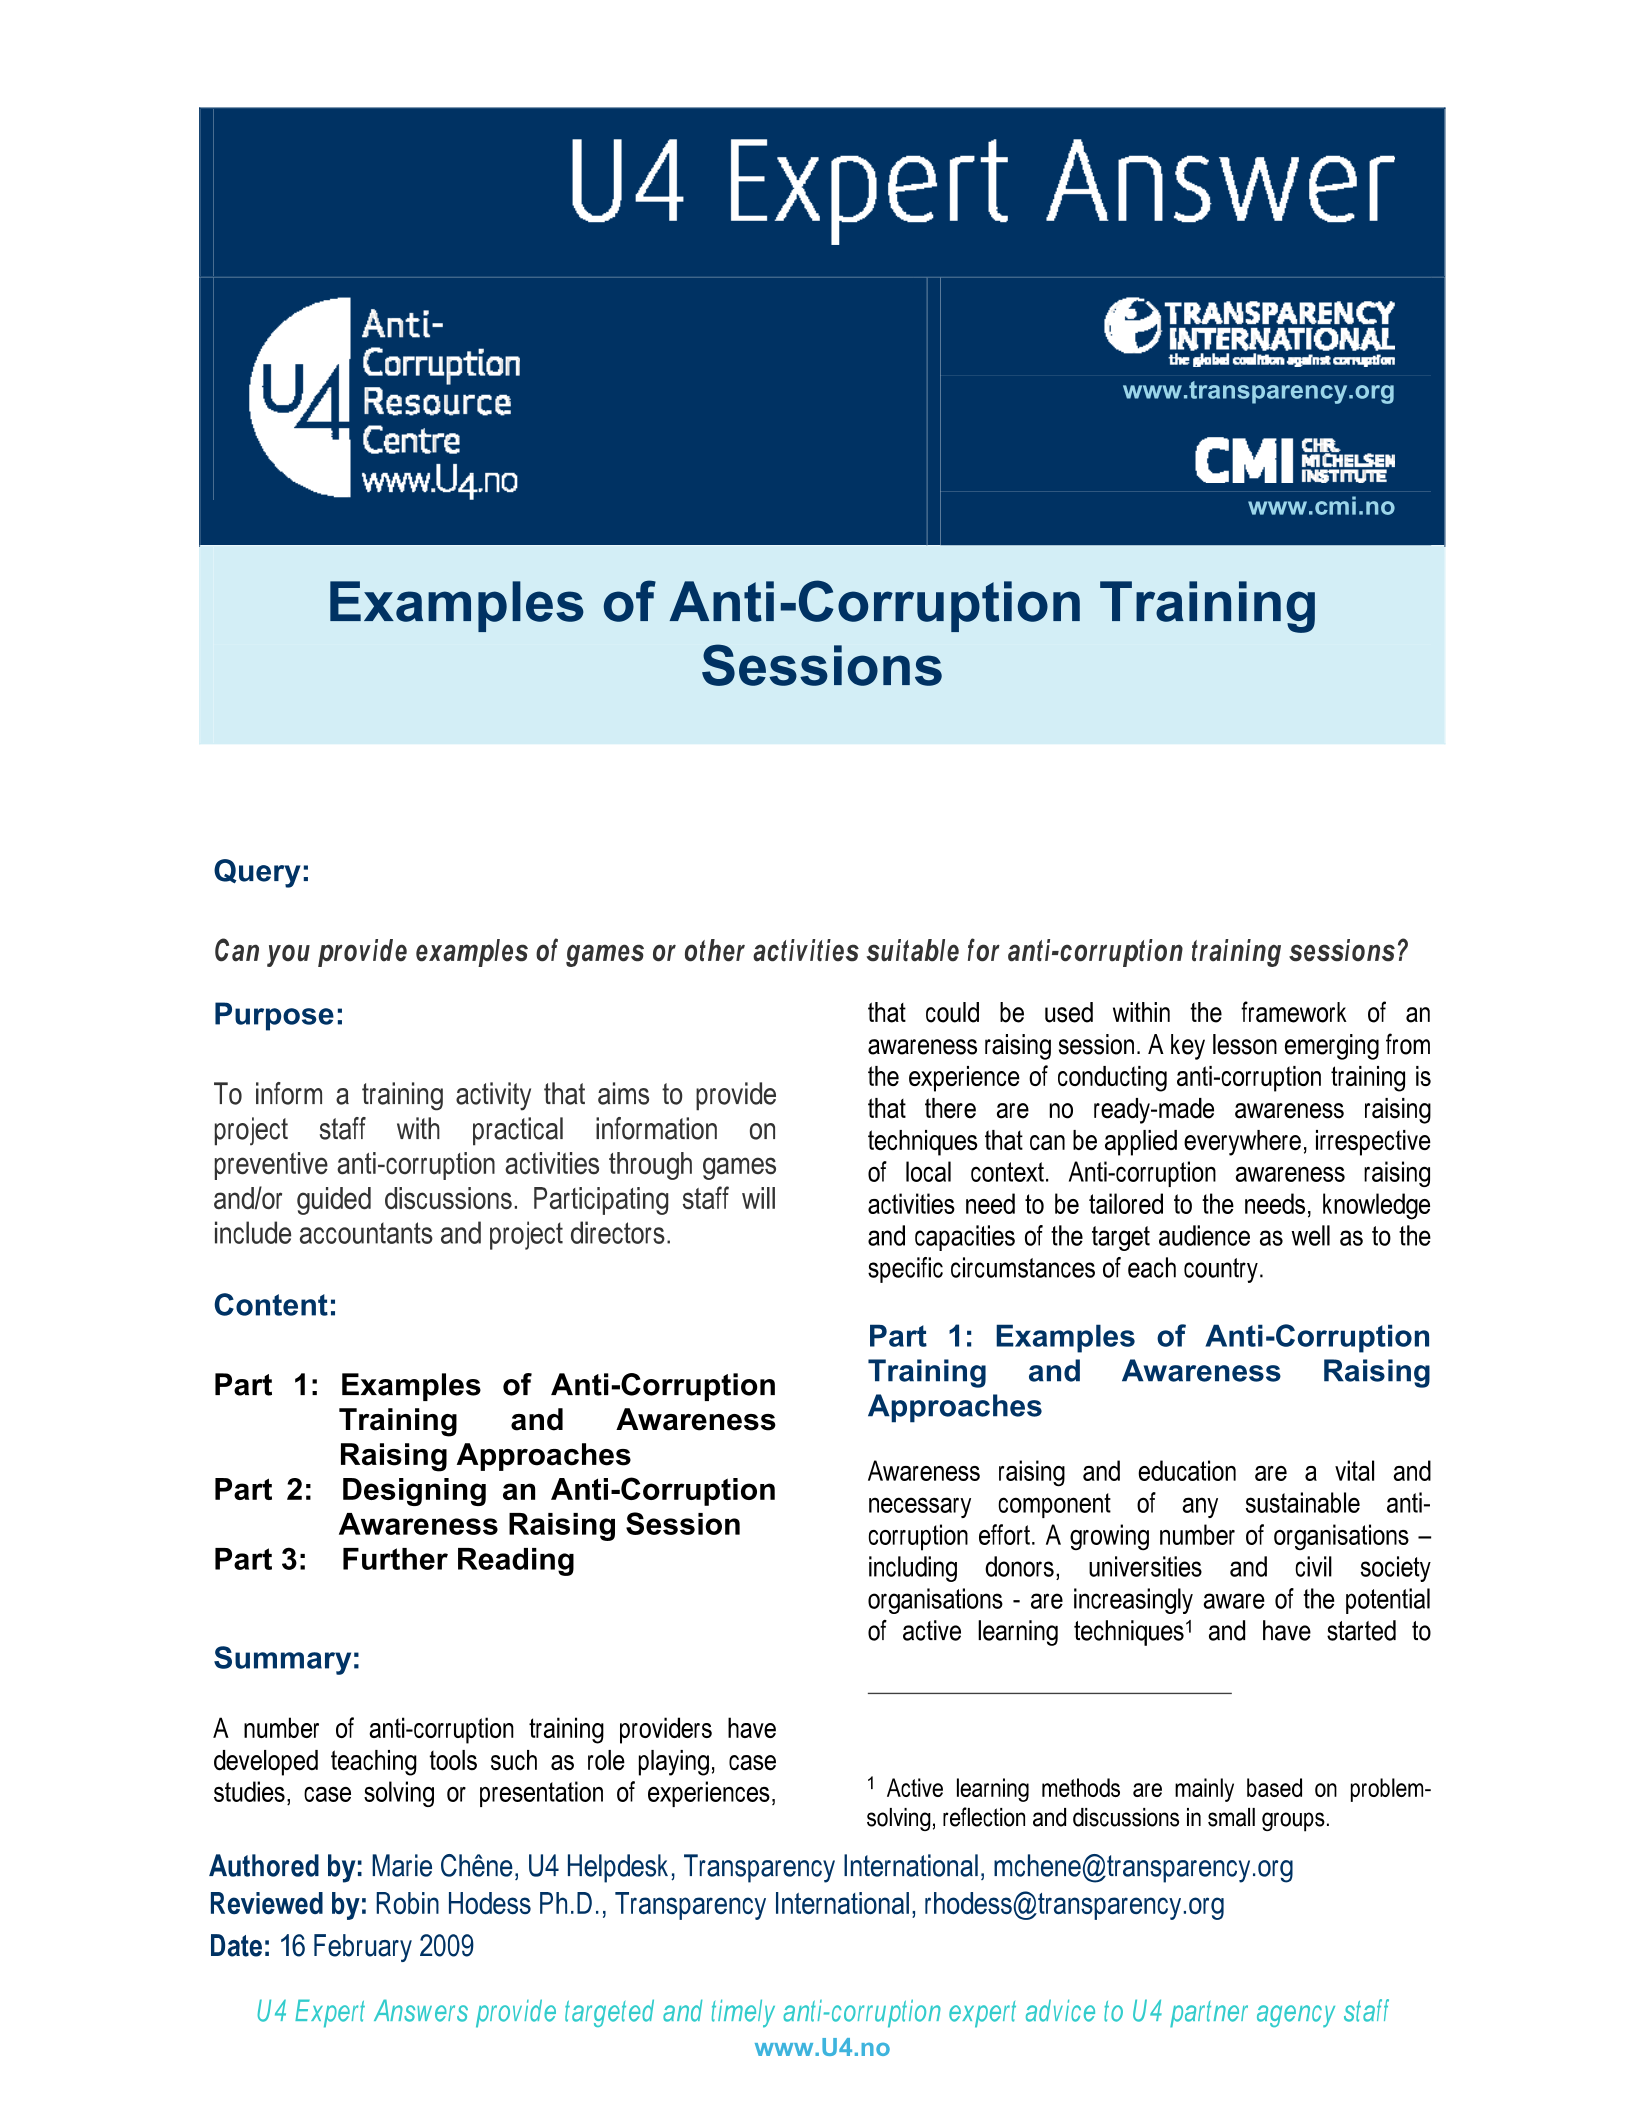 Examples of anti-corruption training sessions